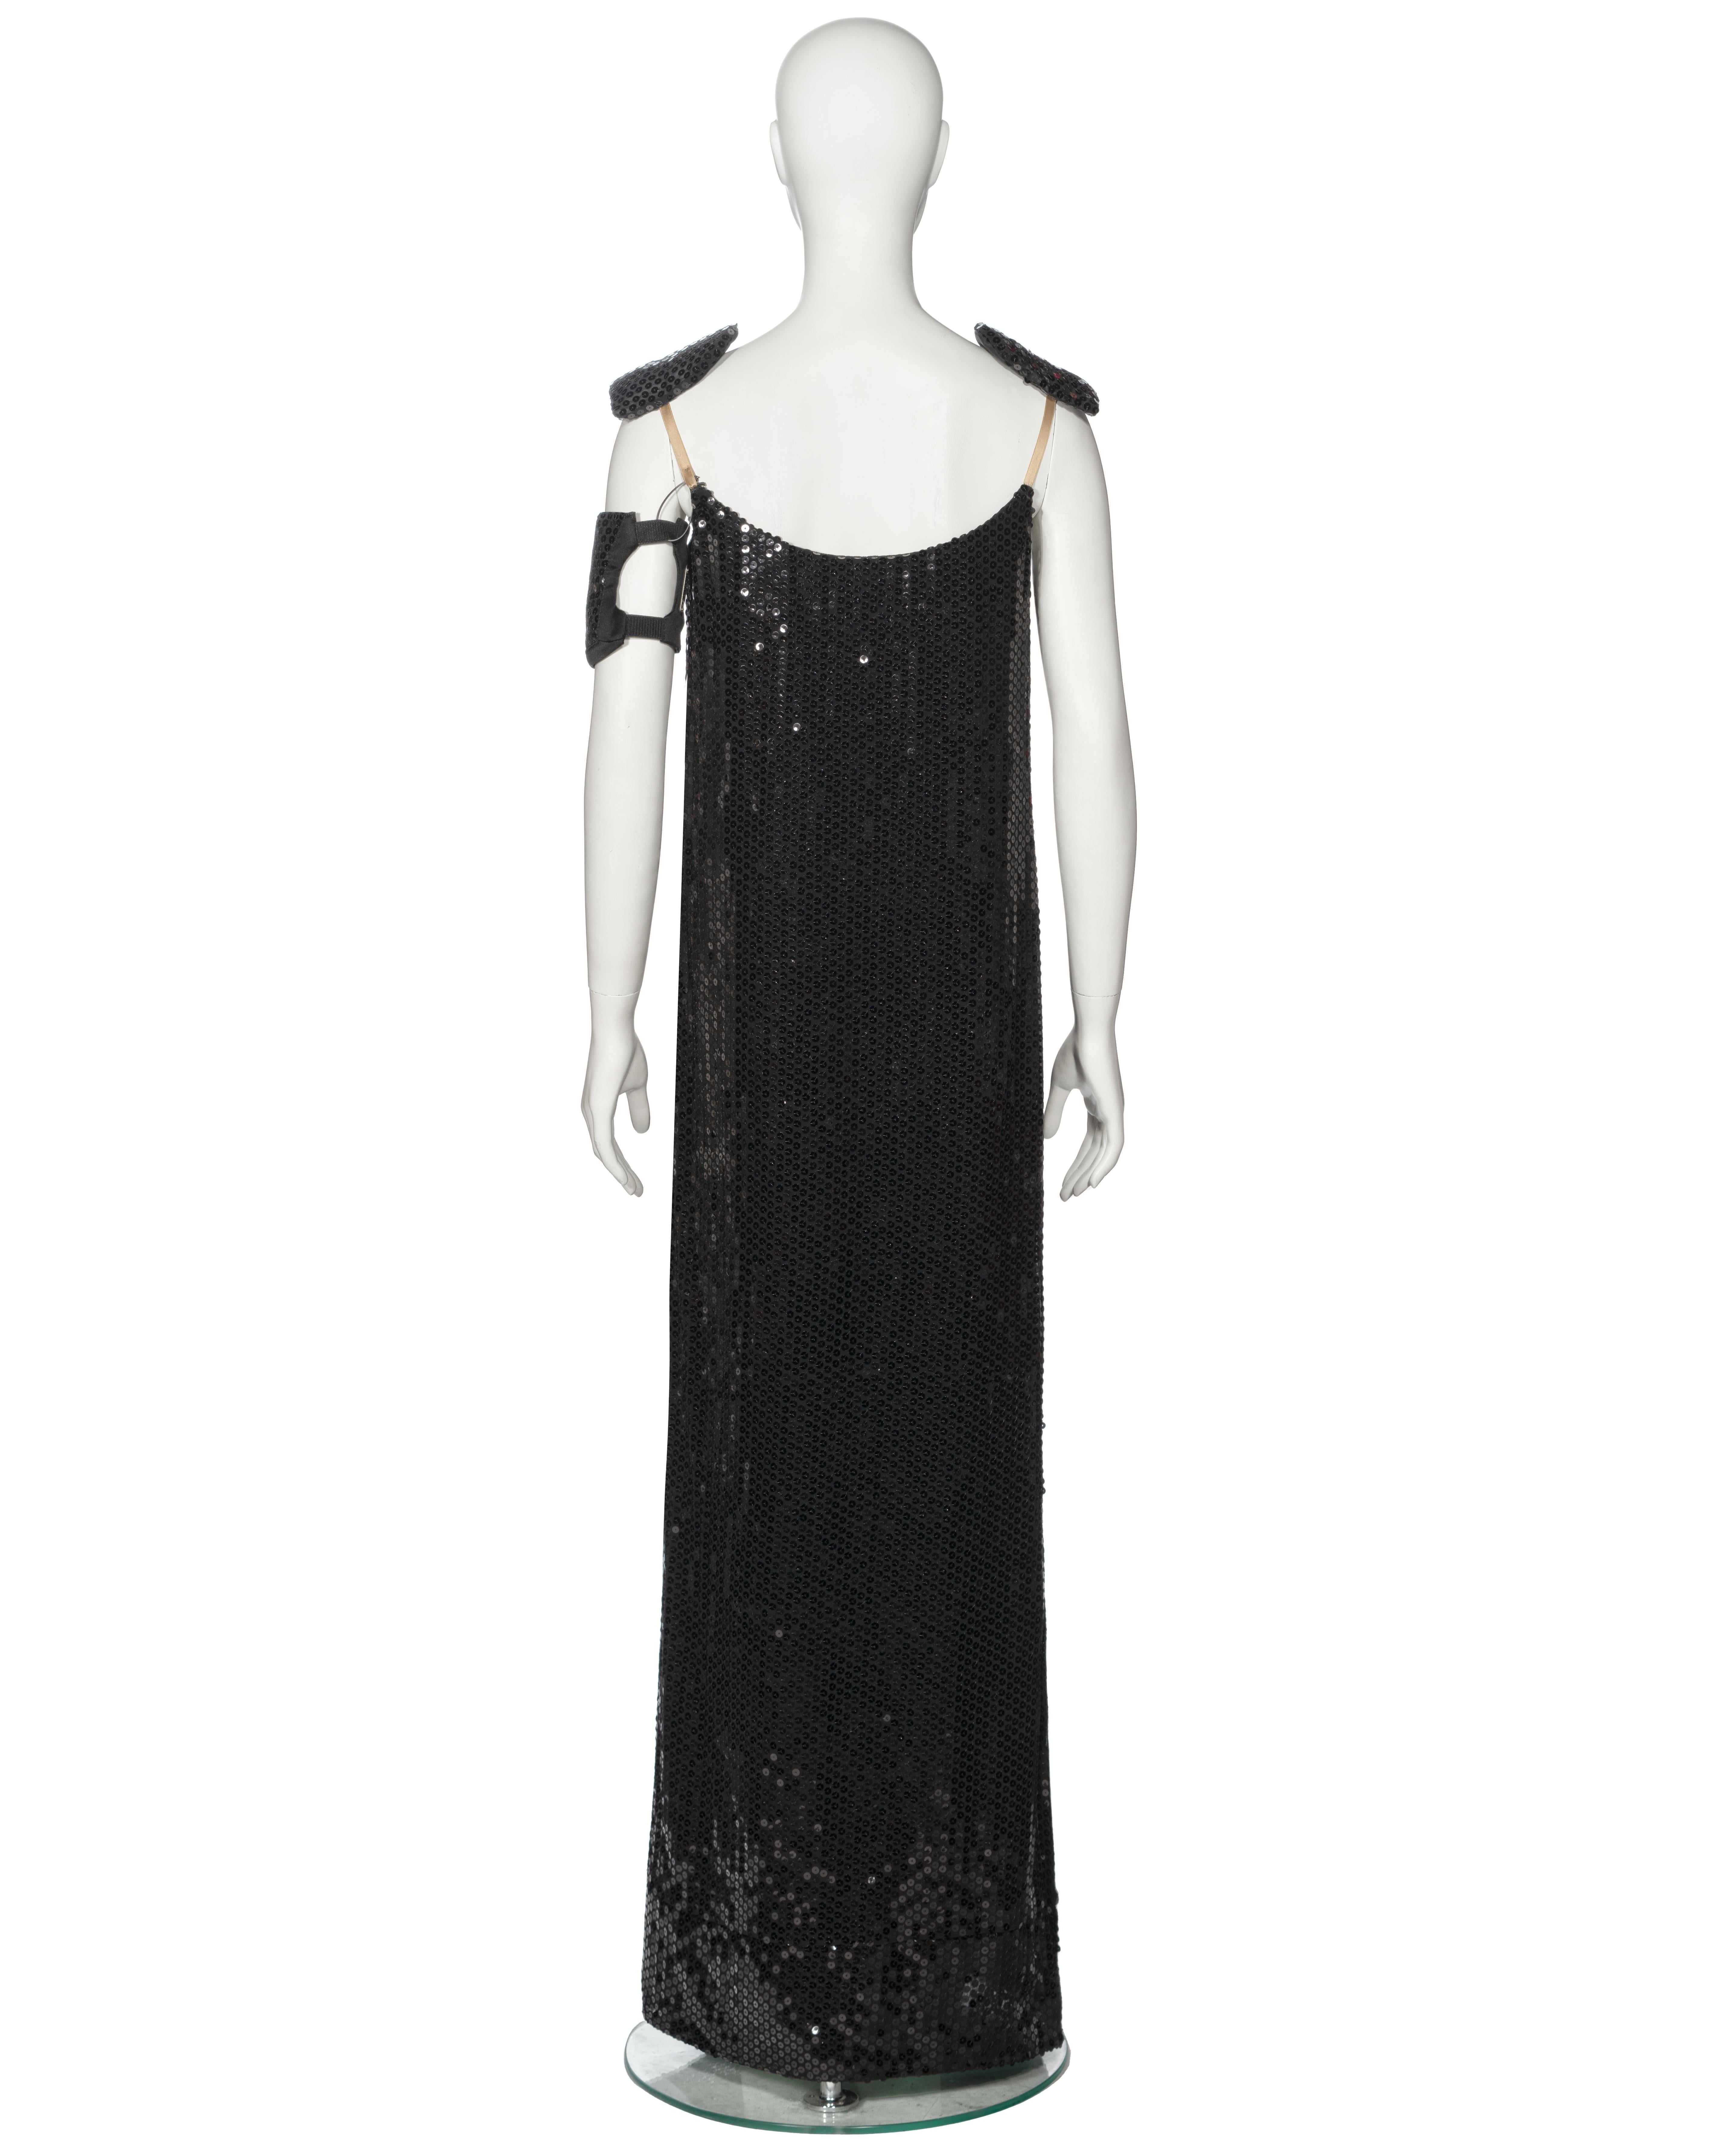 Helmut Lang Black Sequin Evening Dress With Armband, fw 1999 For Sale 11